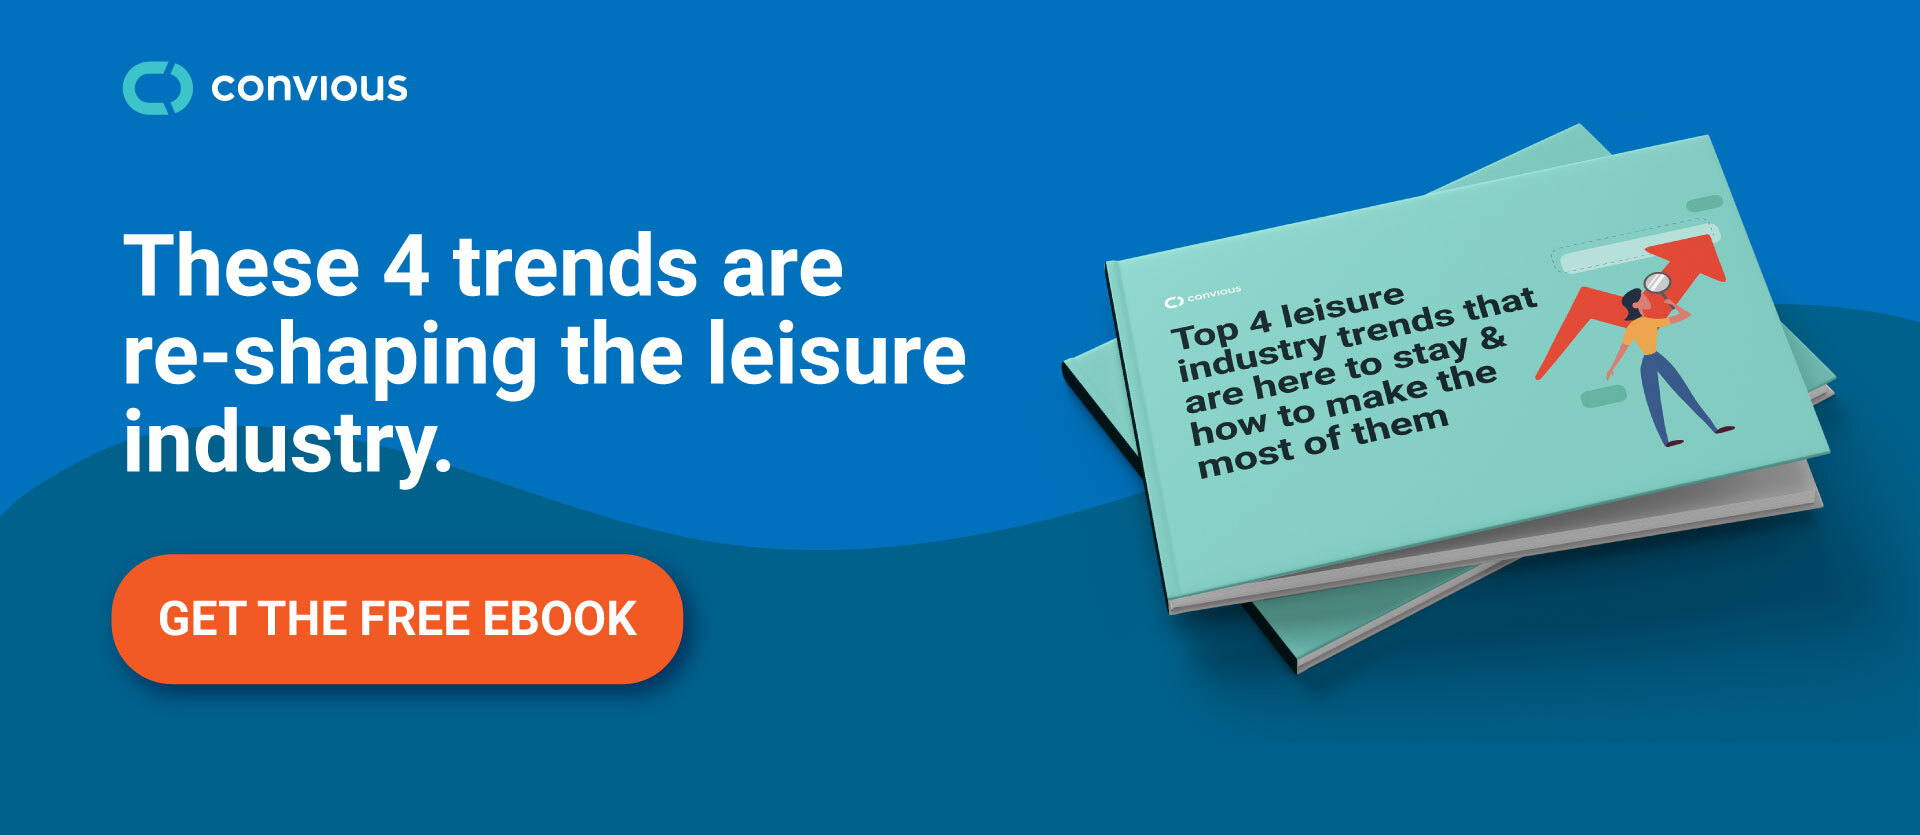 Top trends that are reshaping the leisure industry